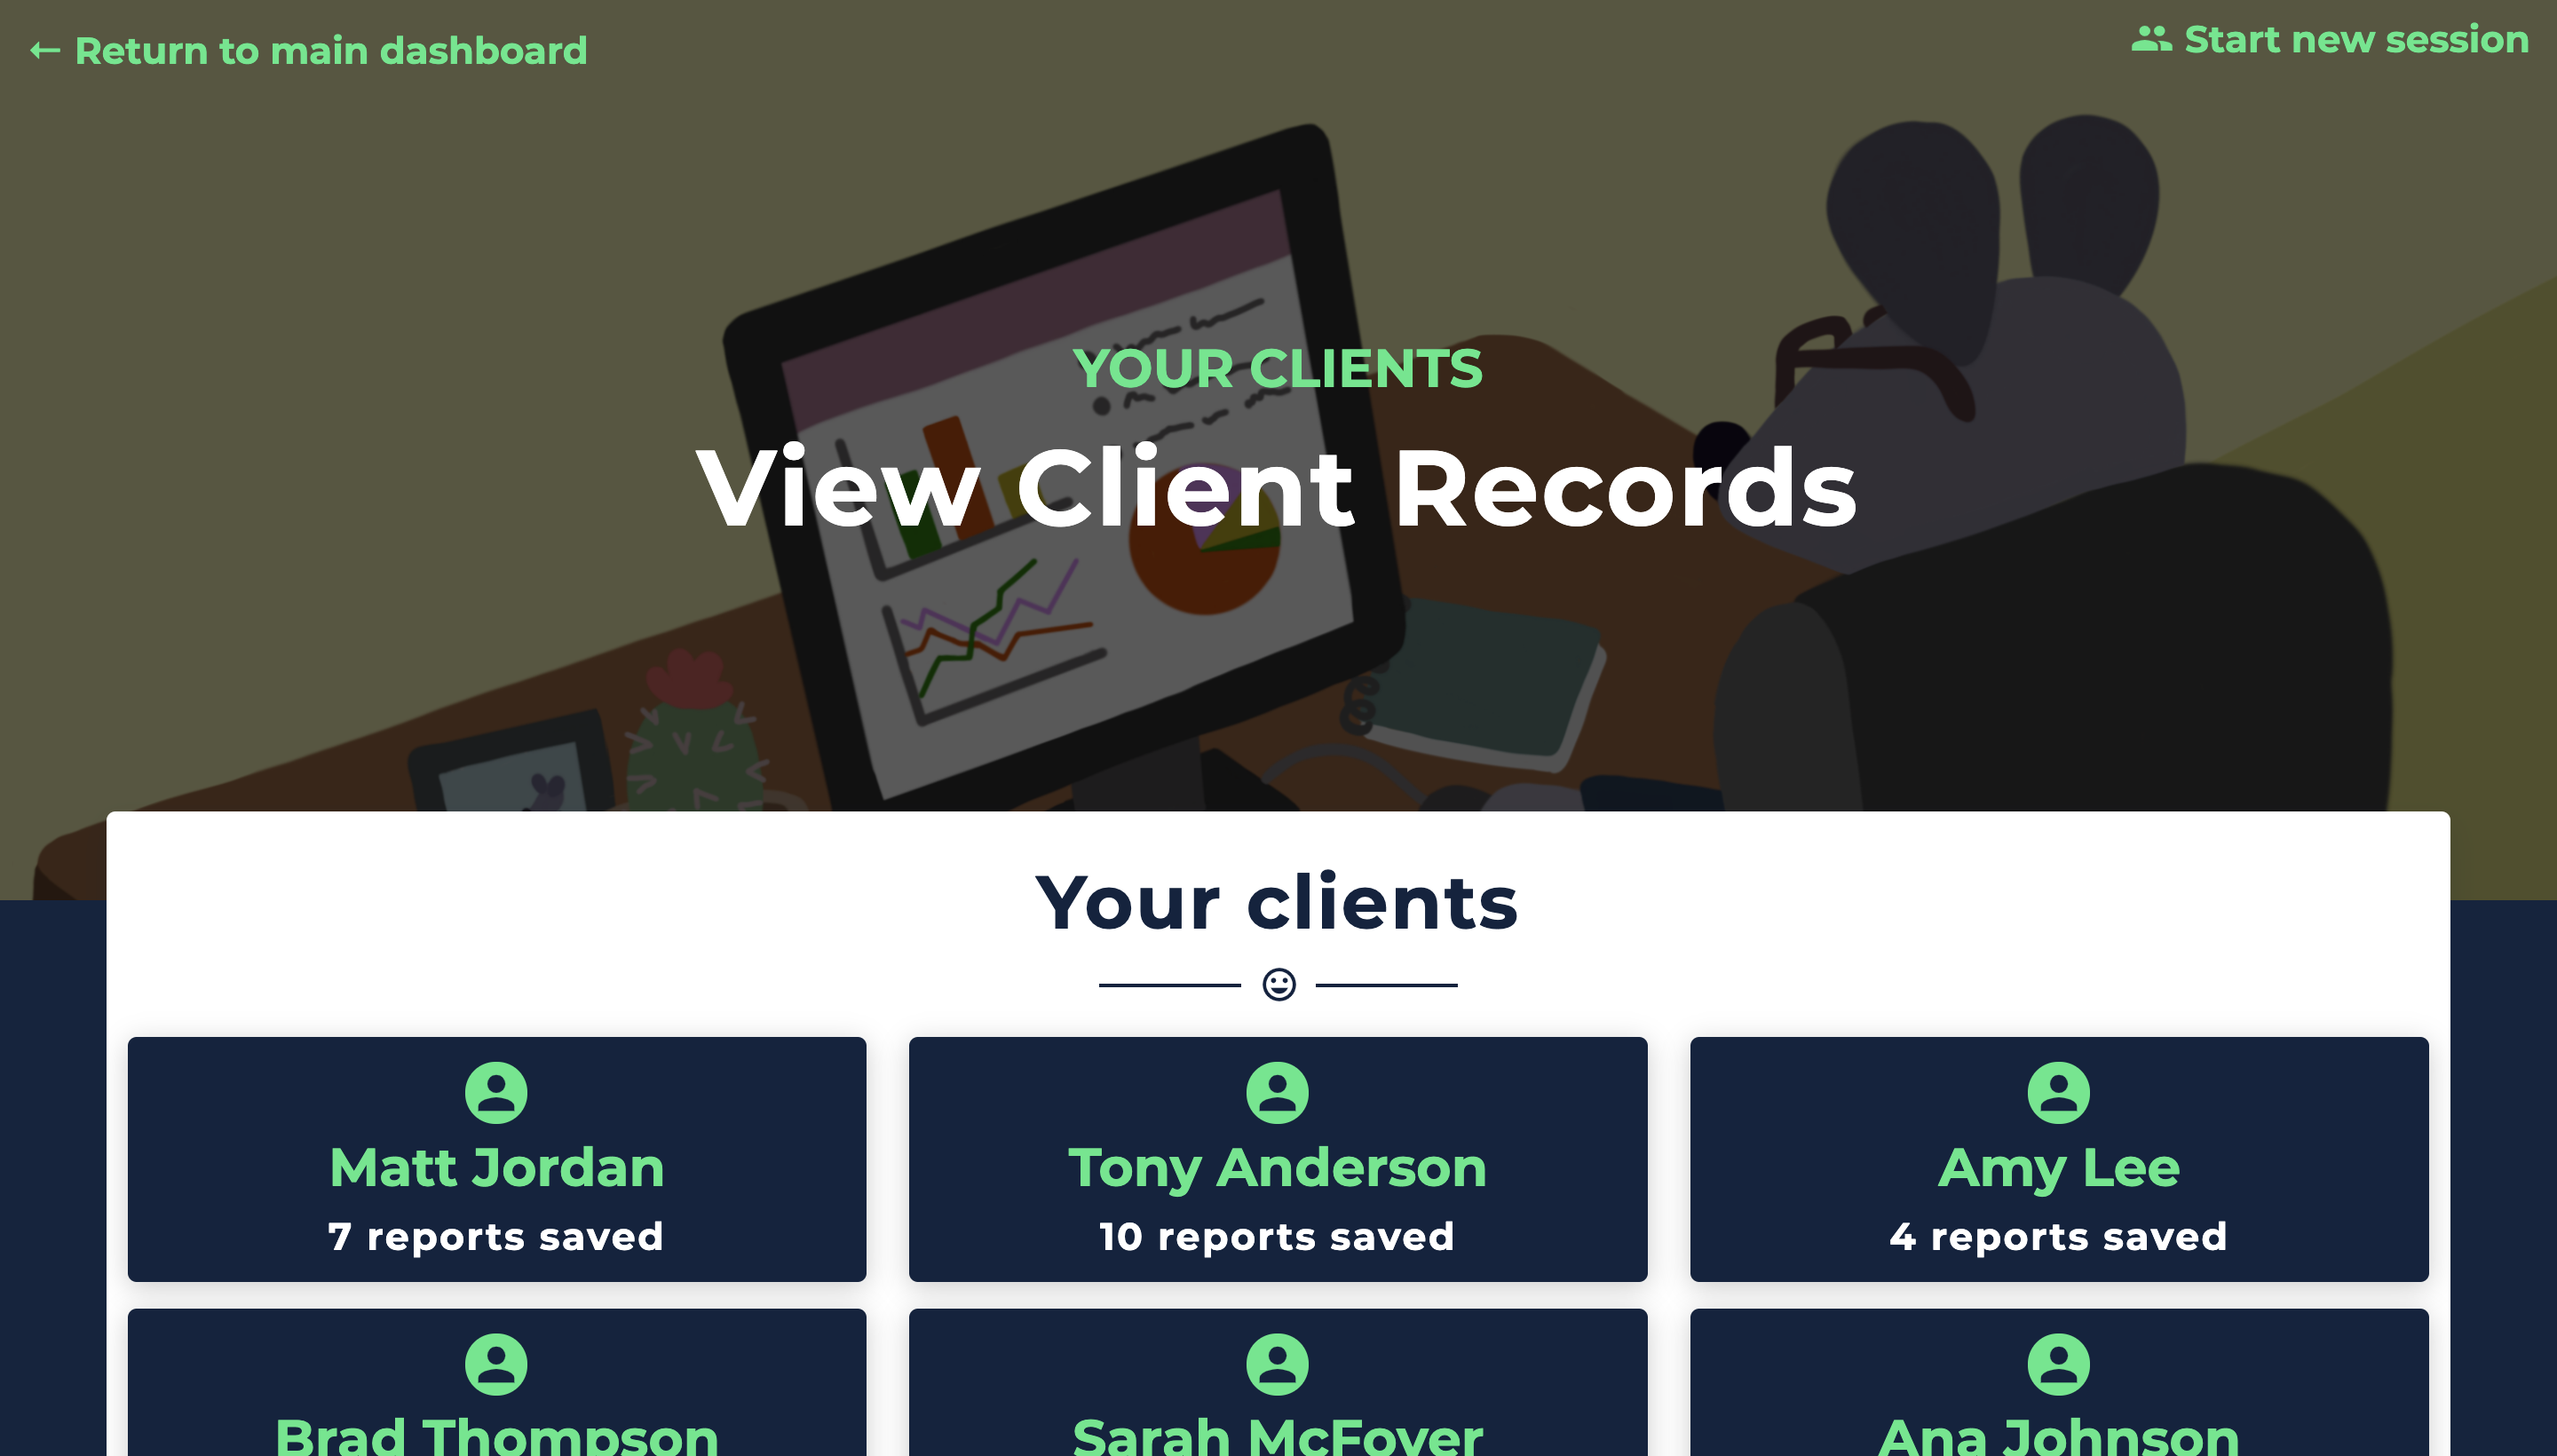 Image of Easy EMDR's client records page